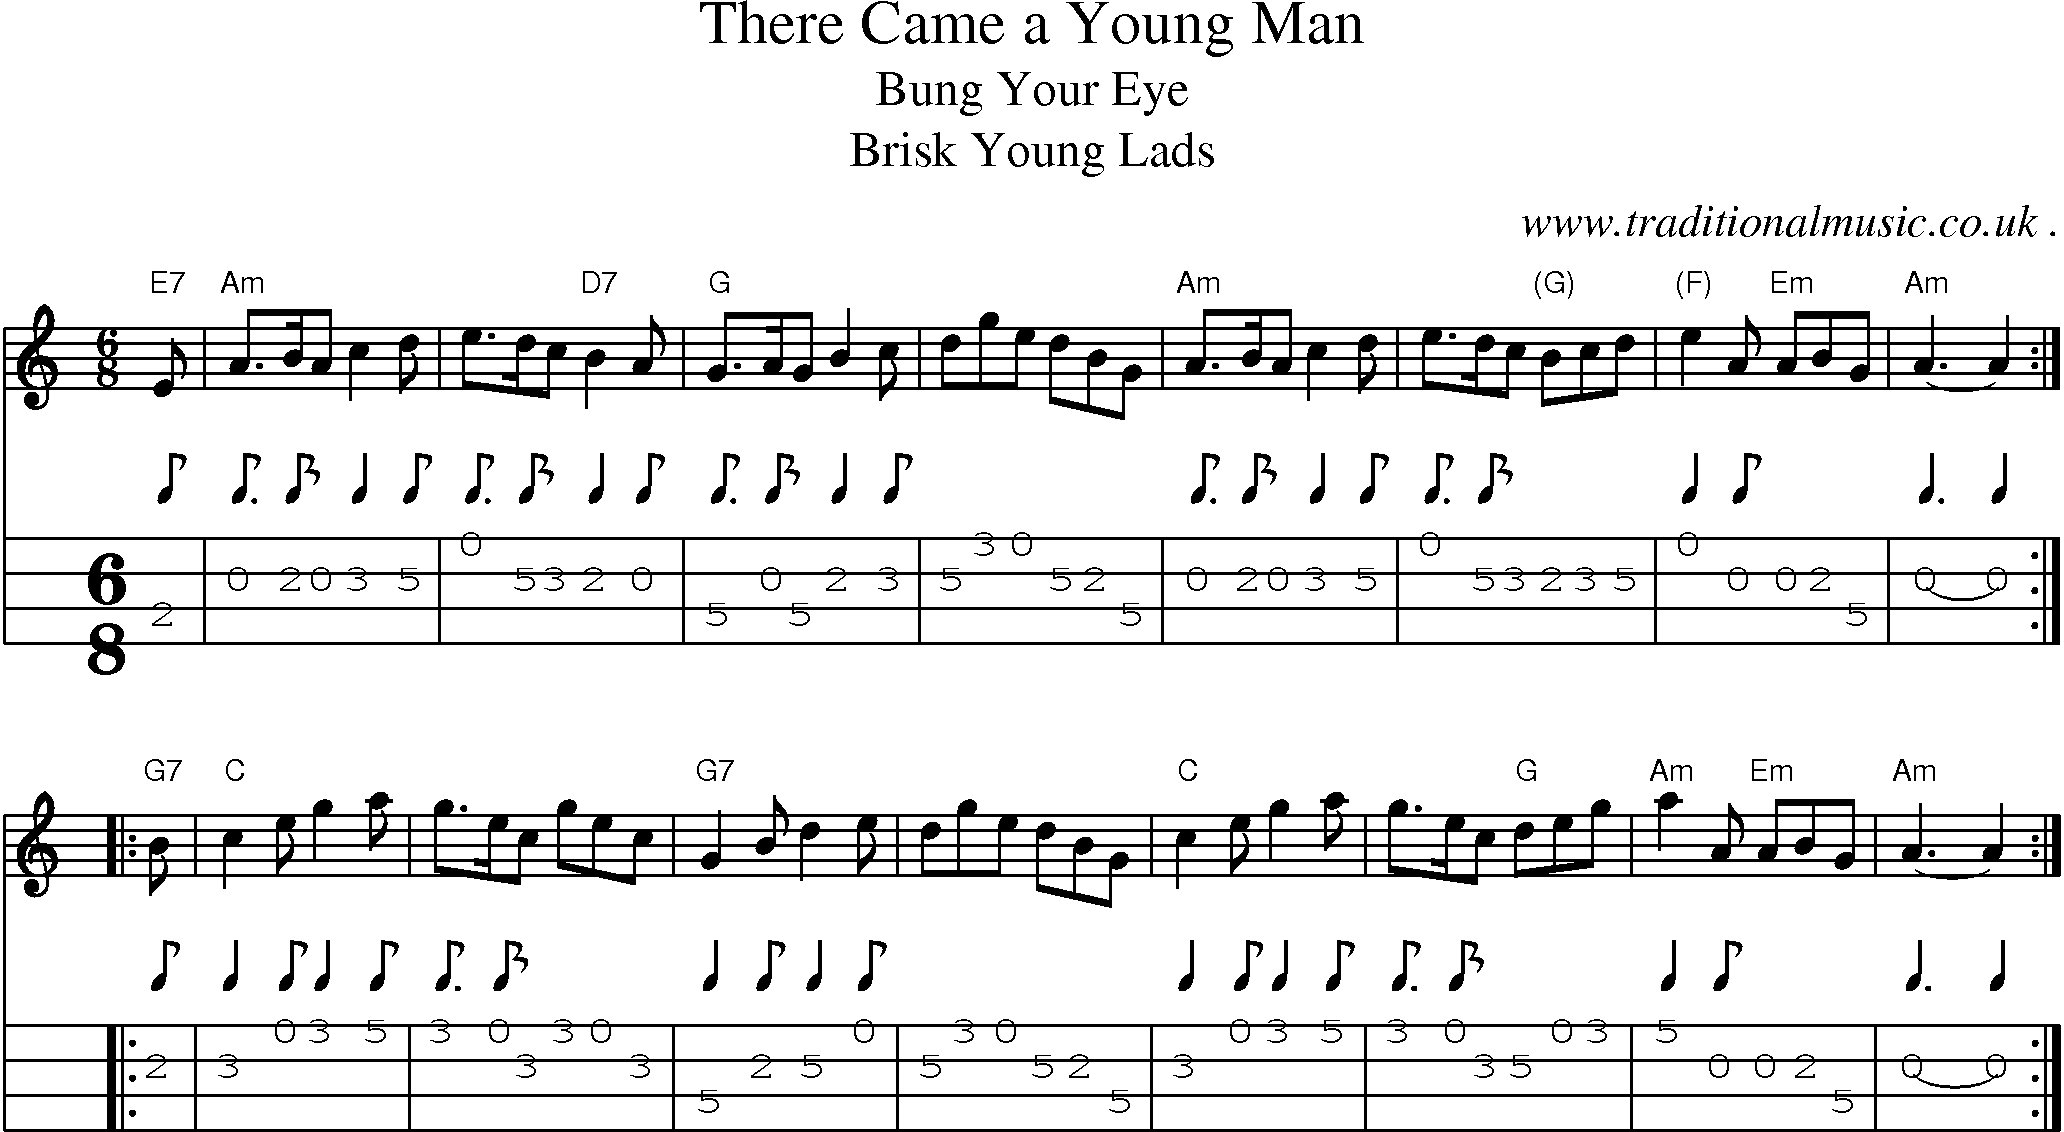 Sheet-music  score, Chords and Mandolin Tabs for There Came A Young Man